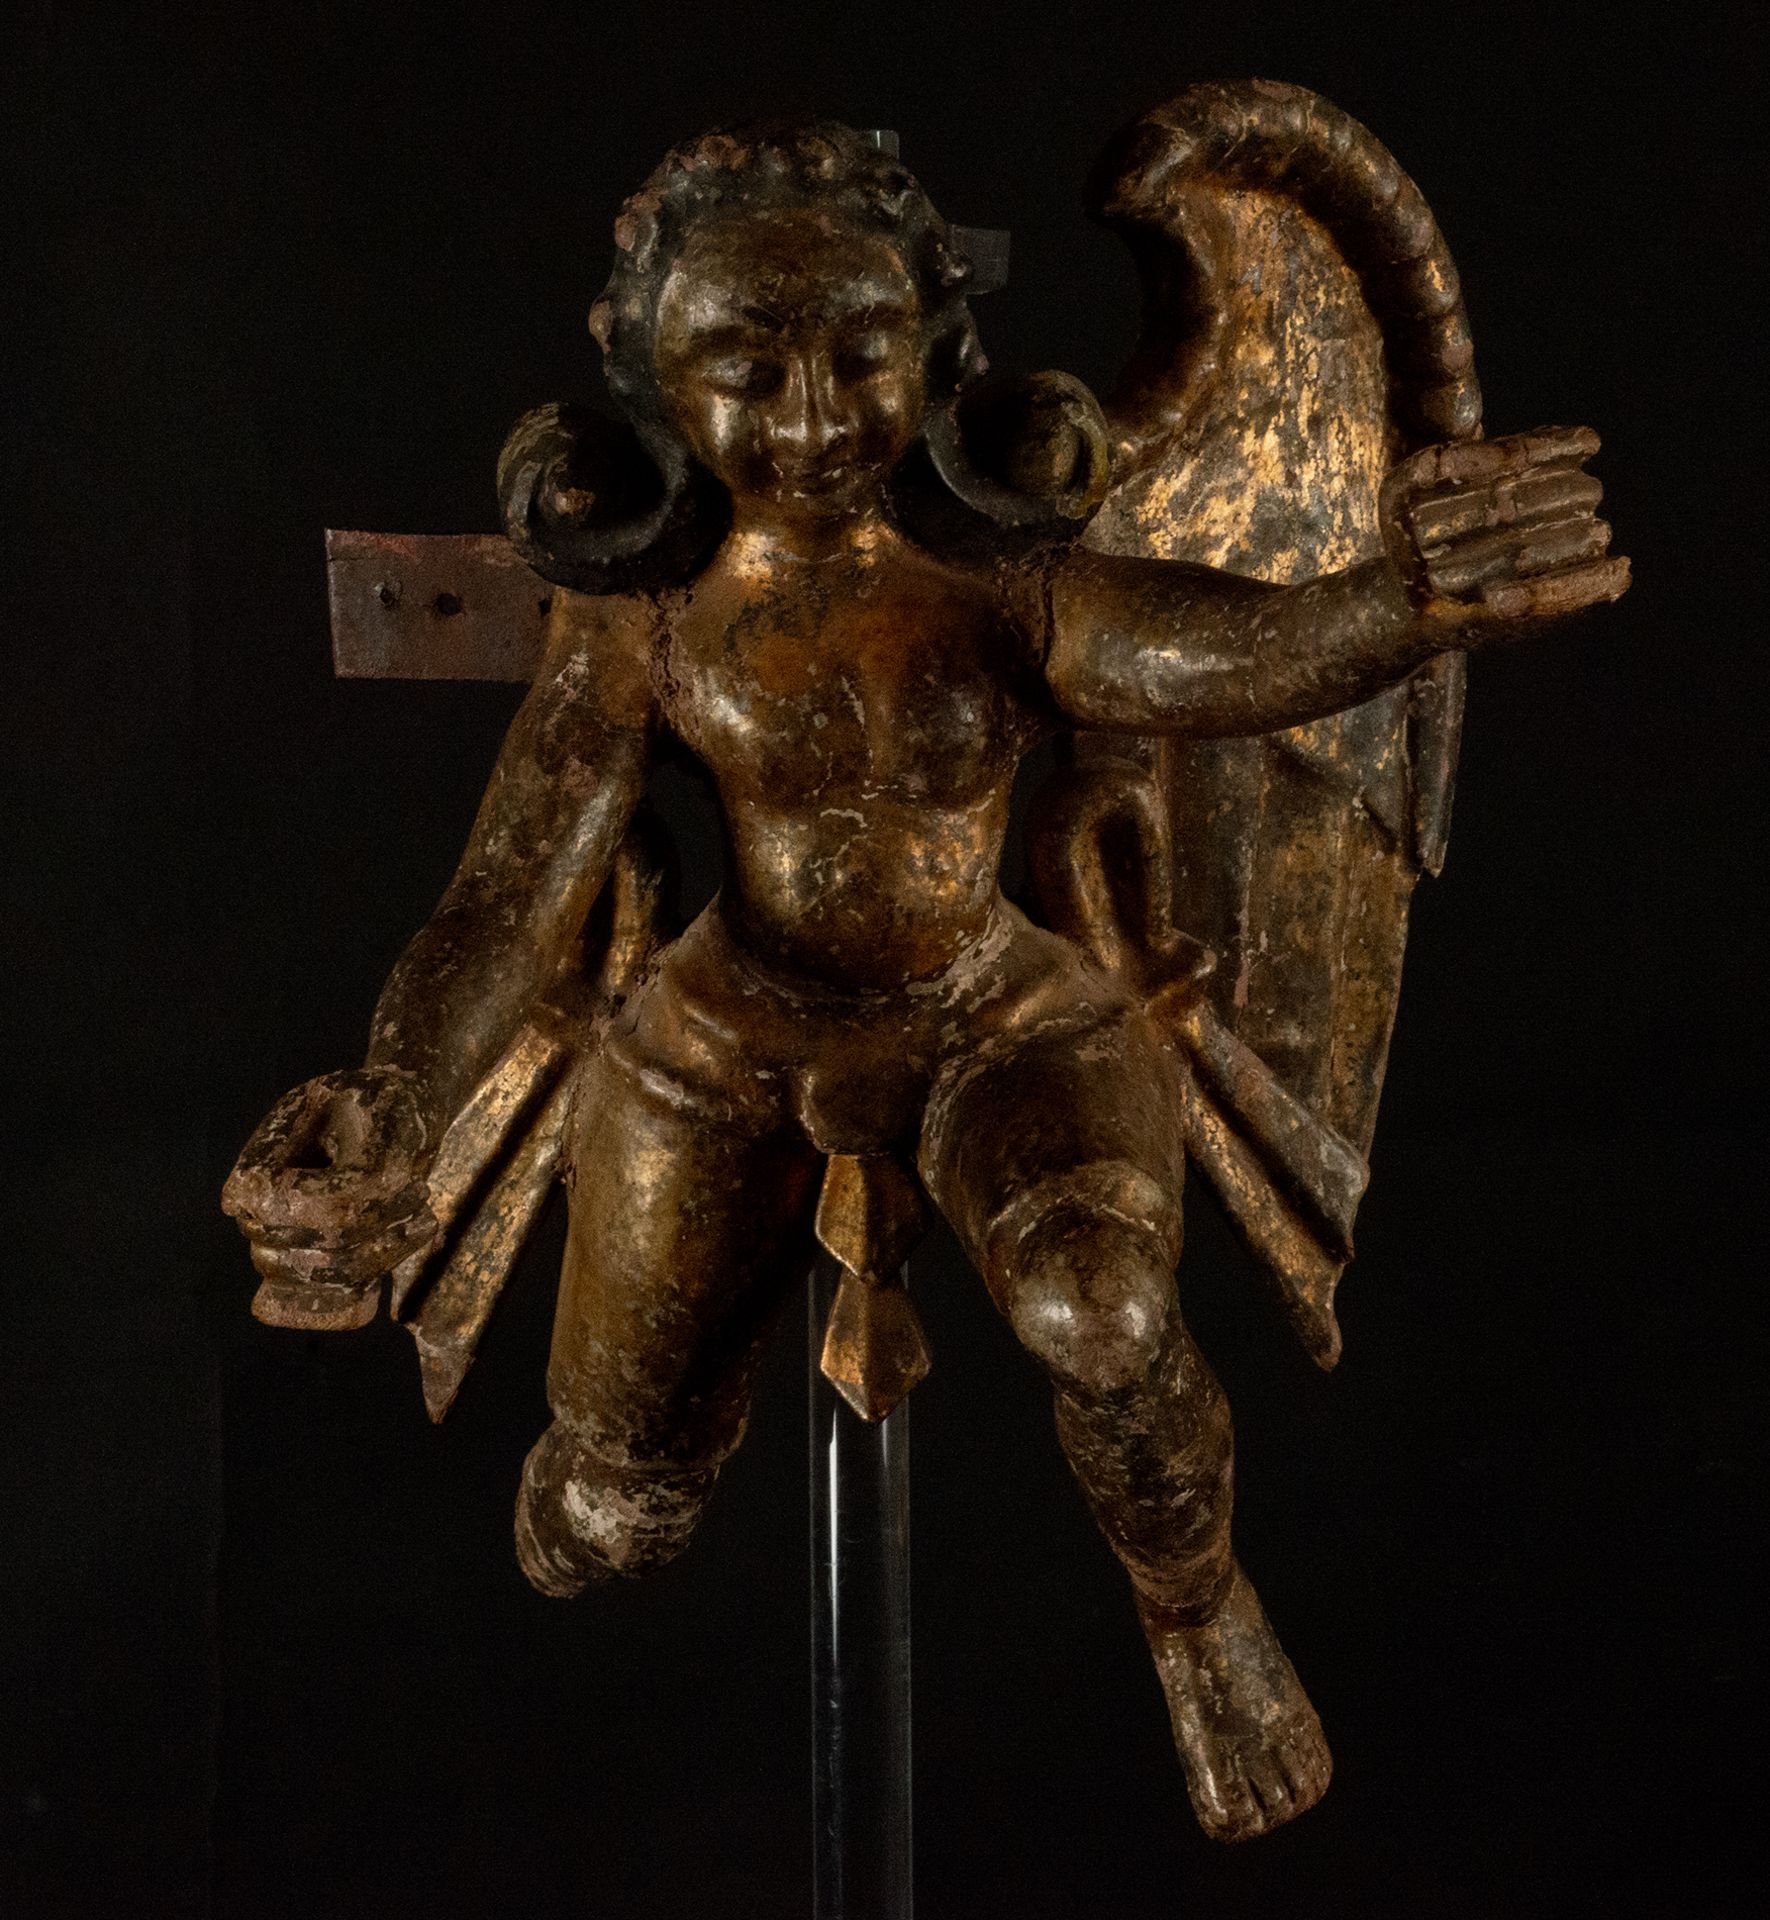 Angel in Carved Wood, Portuguese colonial work, Goa, 17th century